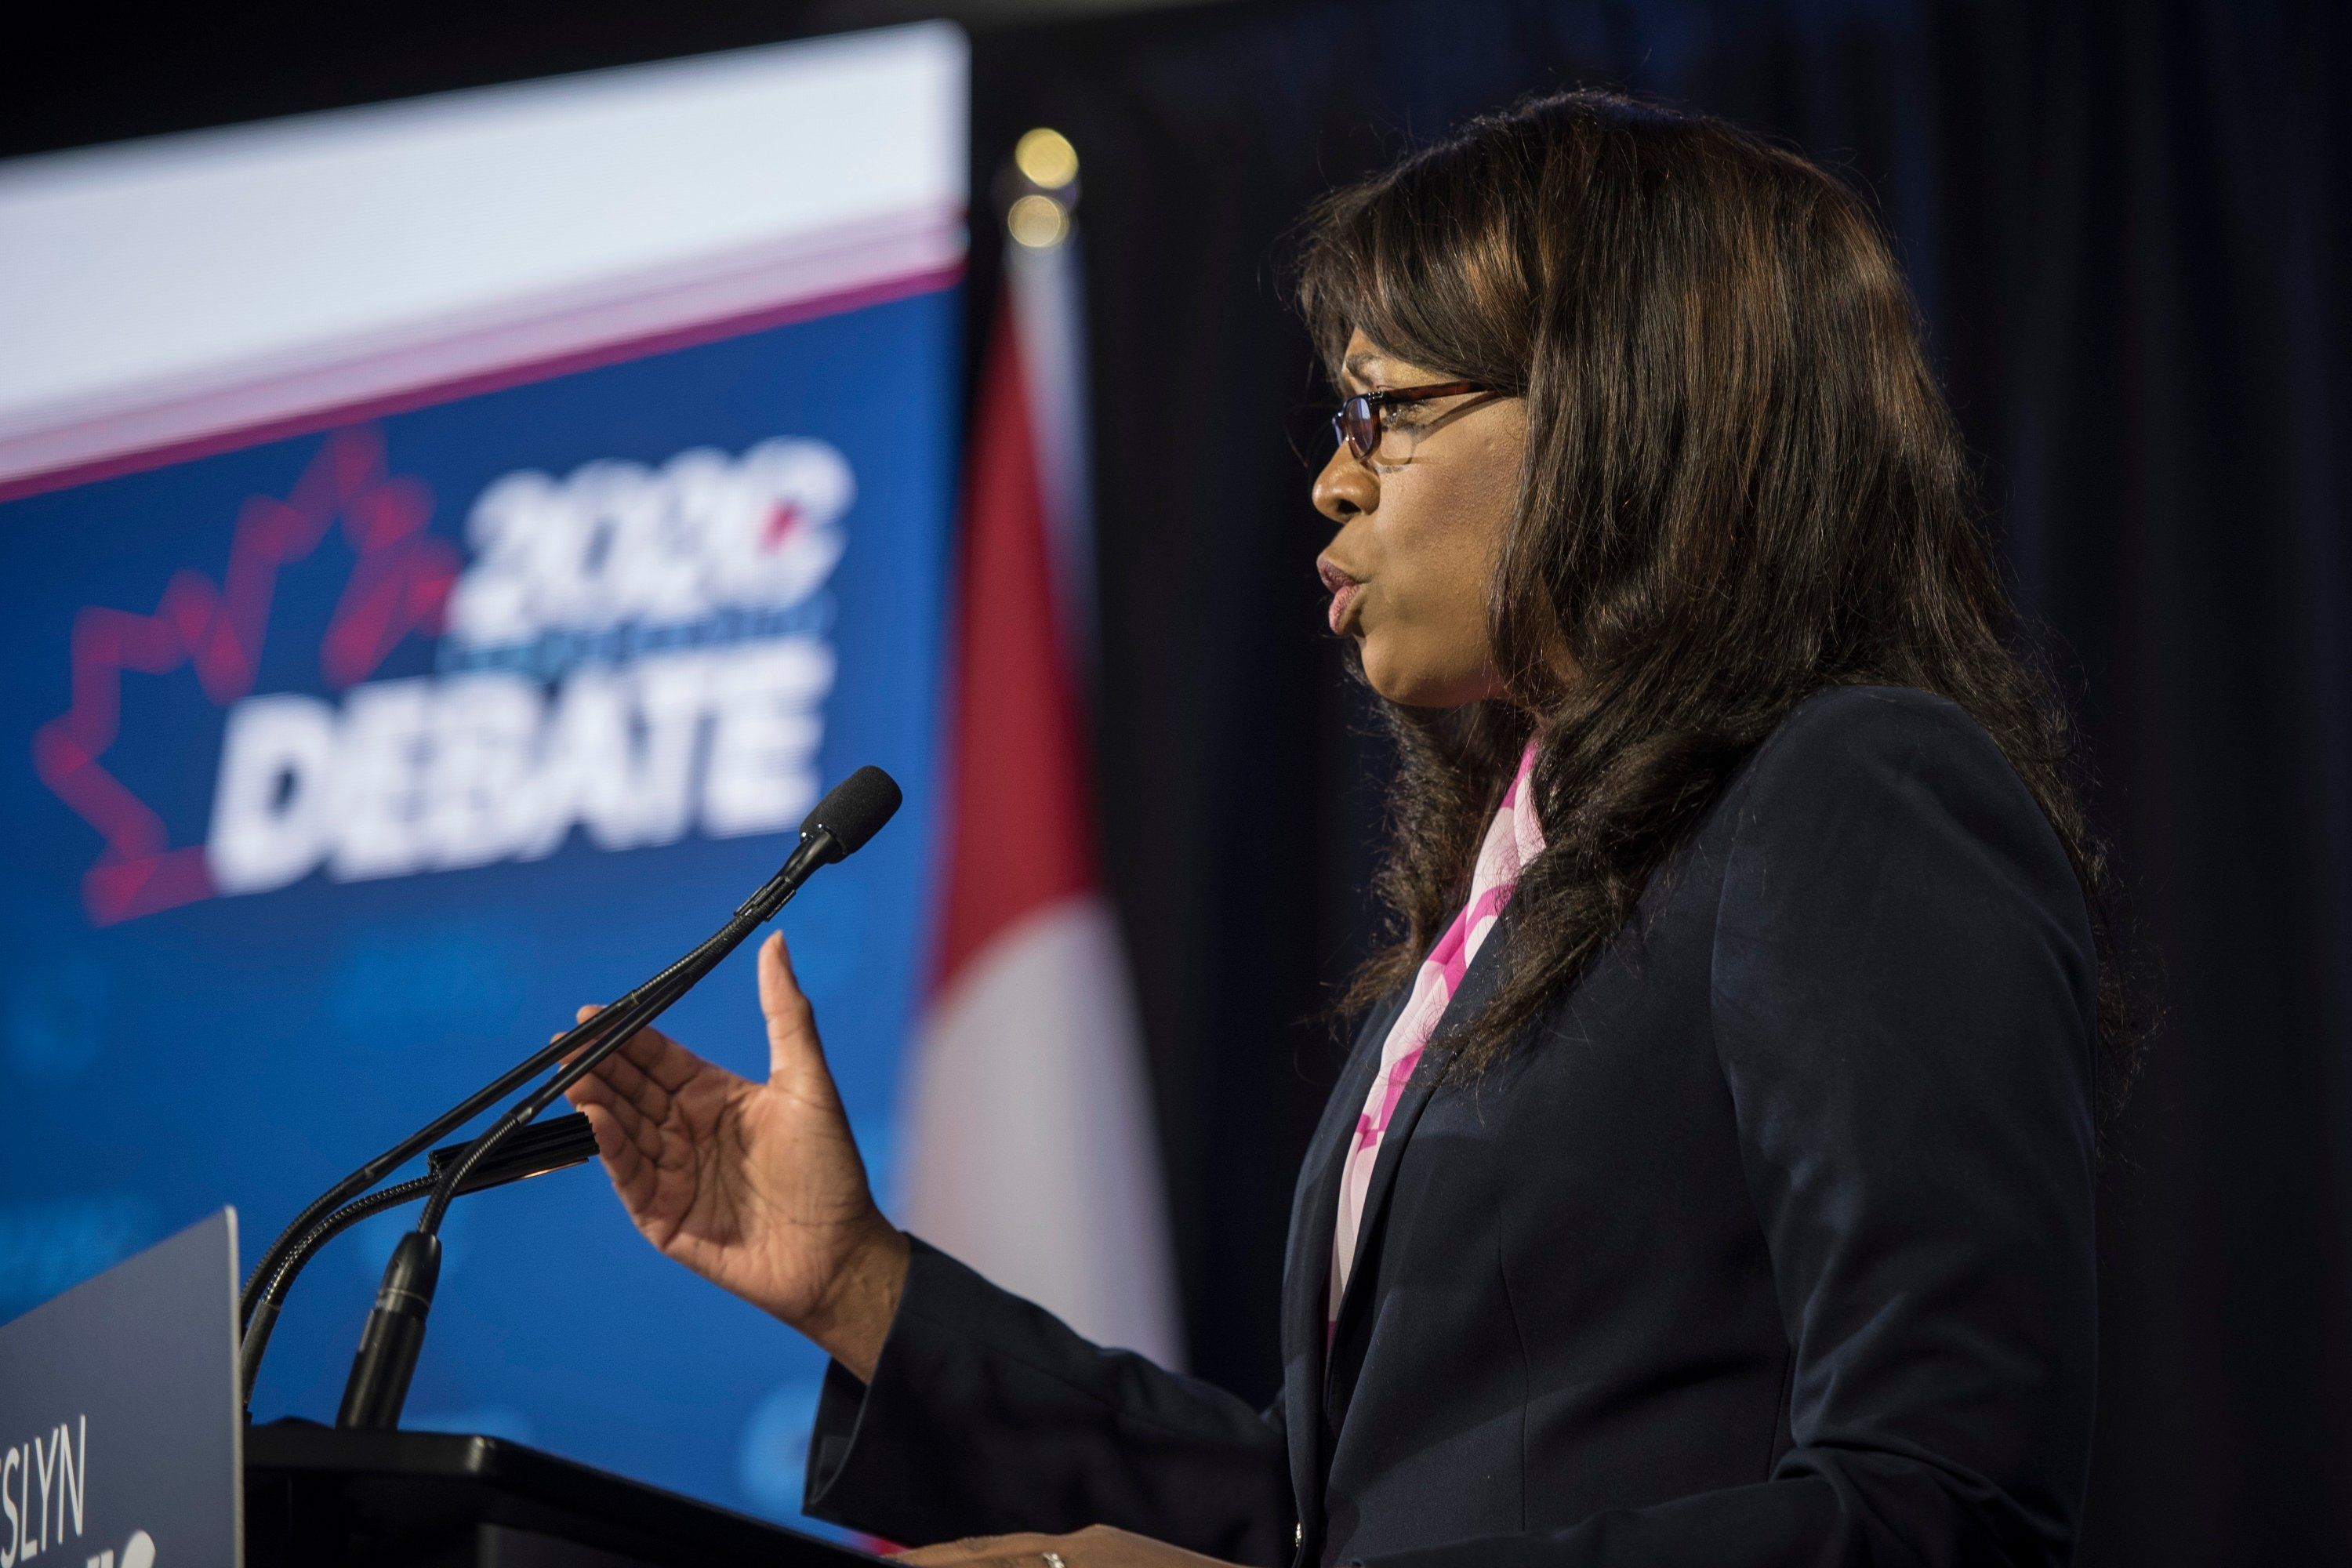 Lewis speaks during the CPC English debate in Toronto, June 18, 2020. (Tijana Martin/The Canadian Press)